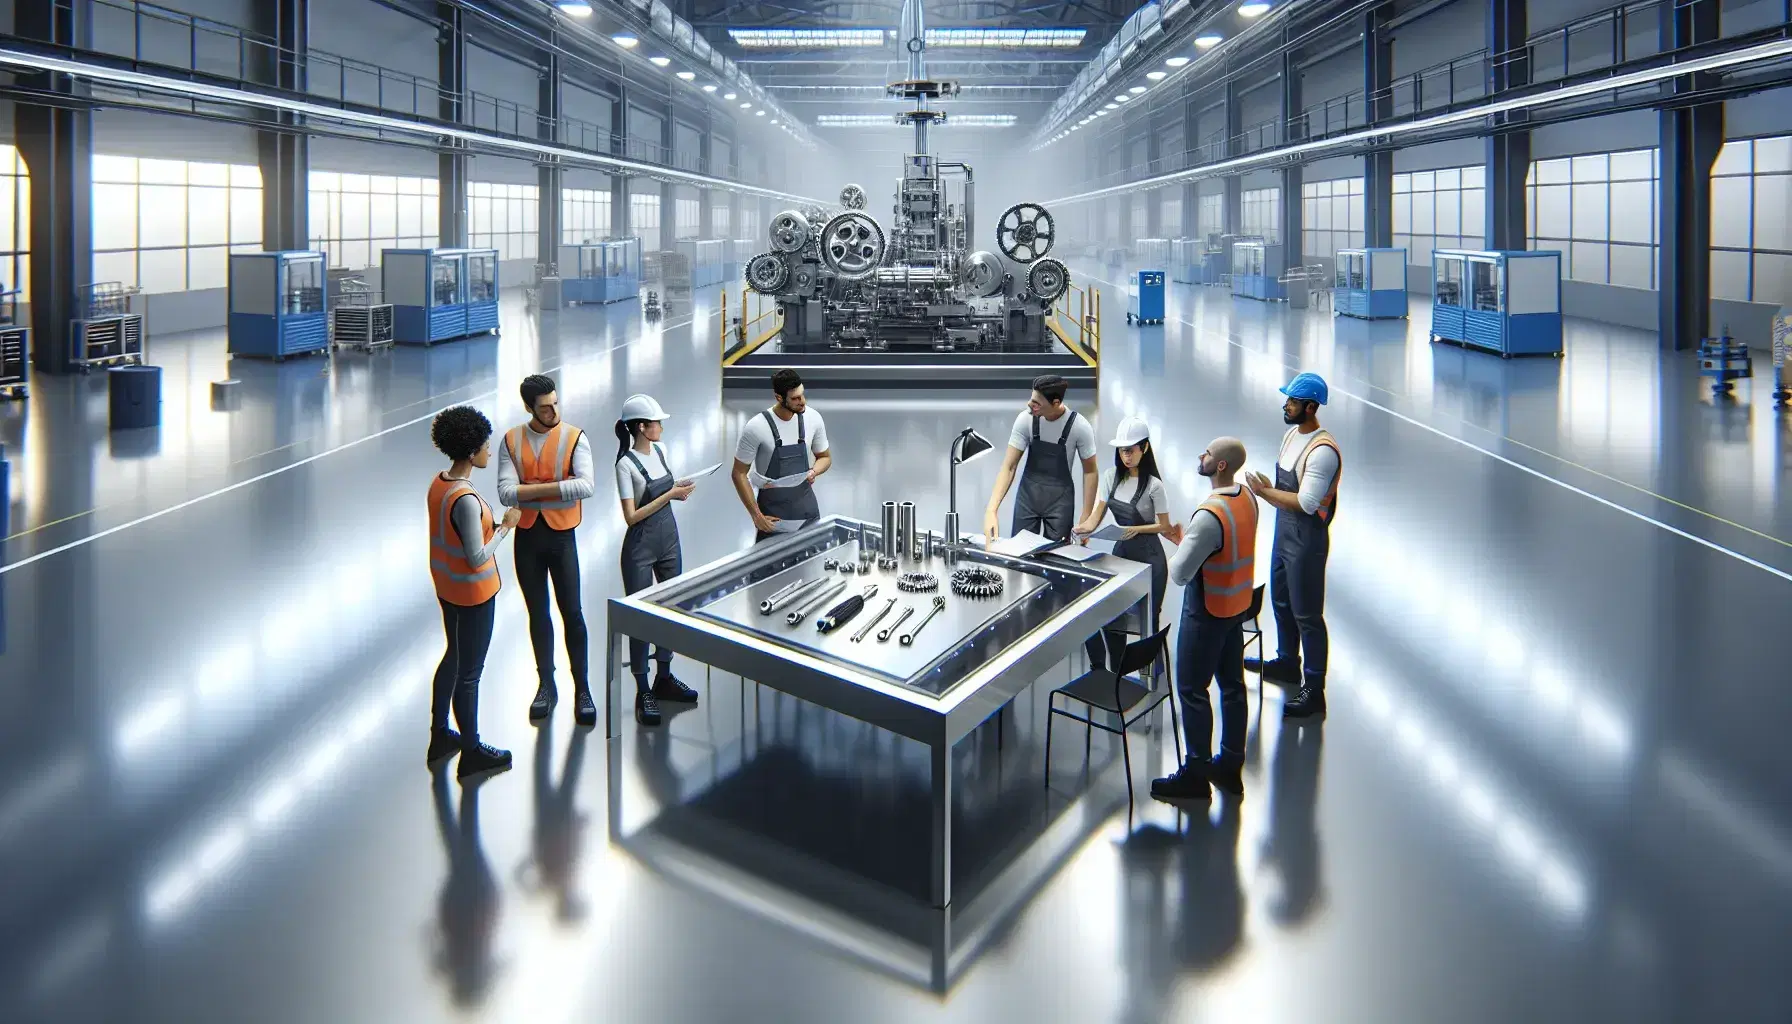 Diverse team of workers in safety gear discusses over a table with tools in a bright, modern manufacturing plant with large machinery.